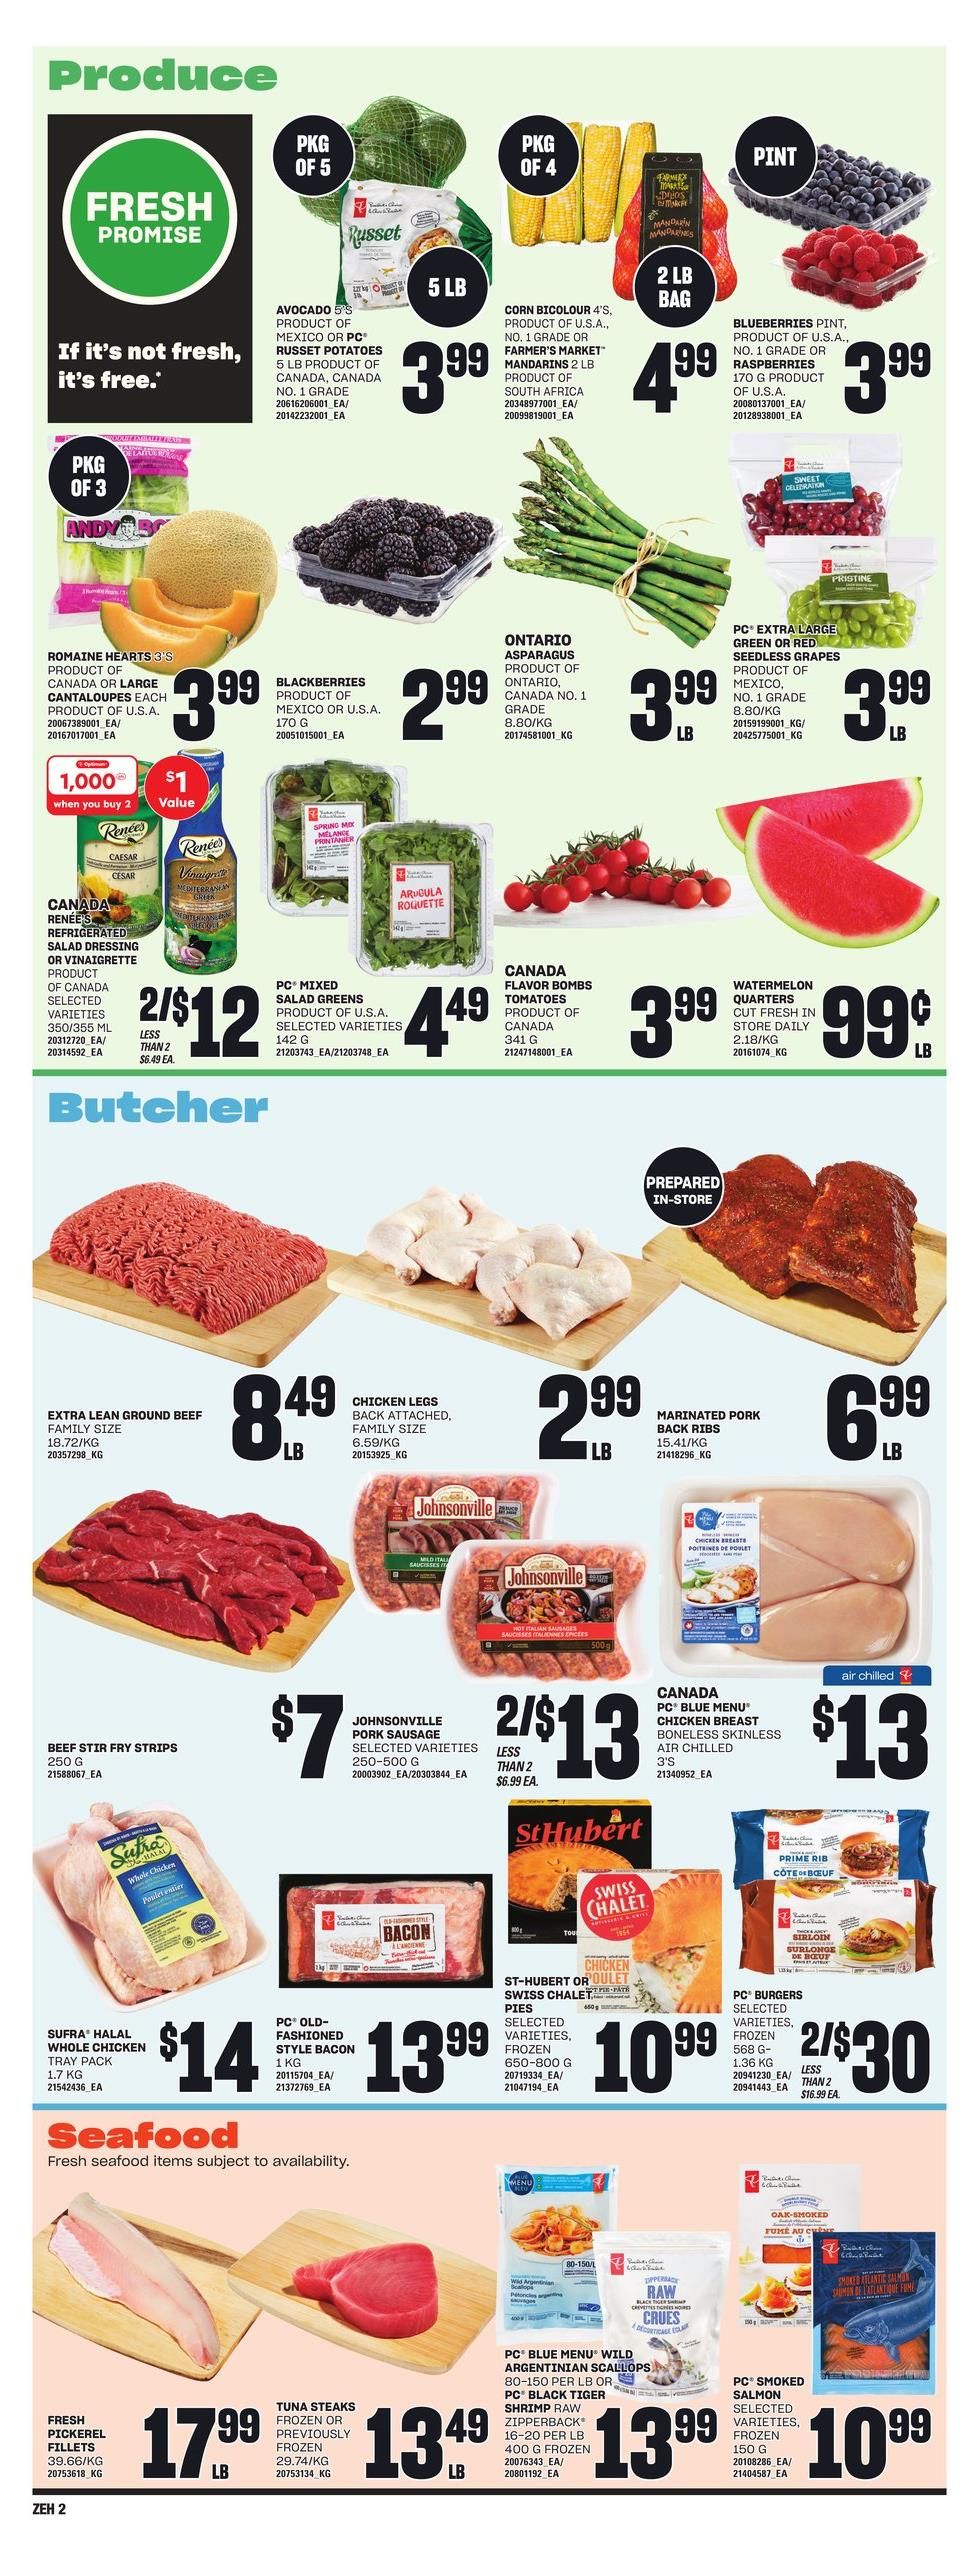 Zehrs - Weekly Flyer Specials - Page 4